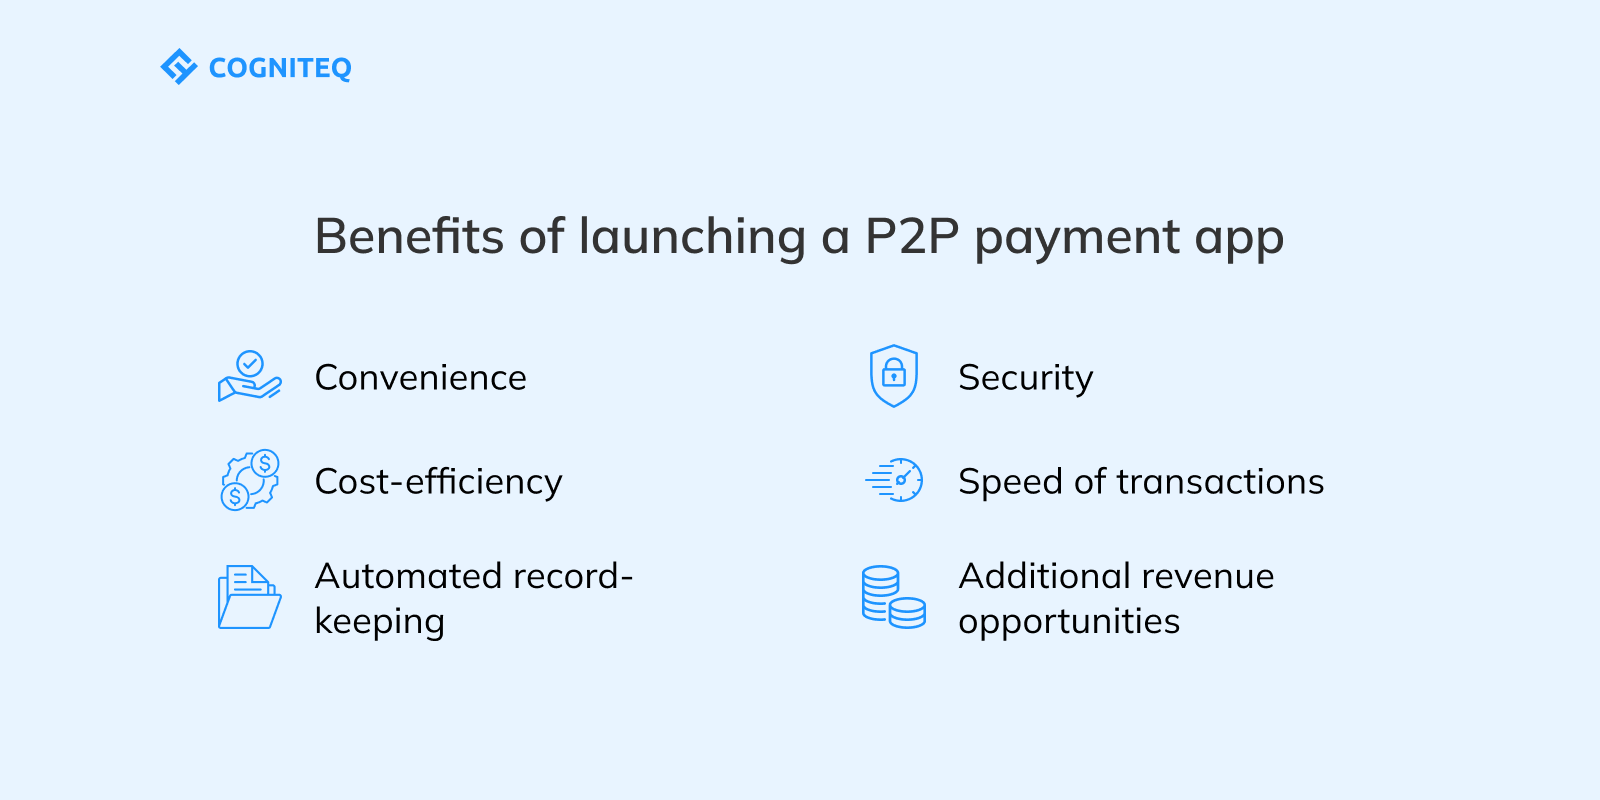 Benefits of launching a P2P payment app